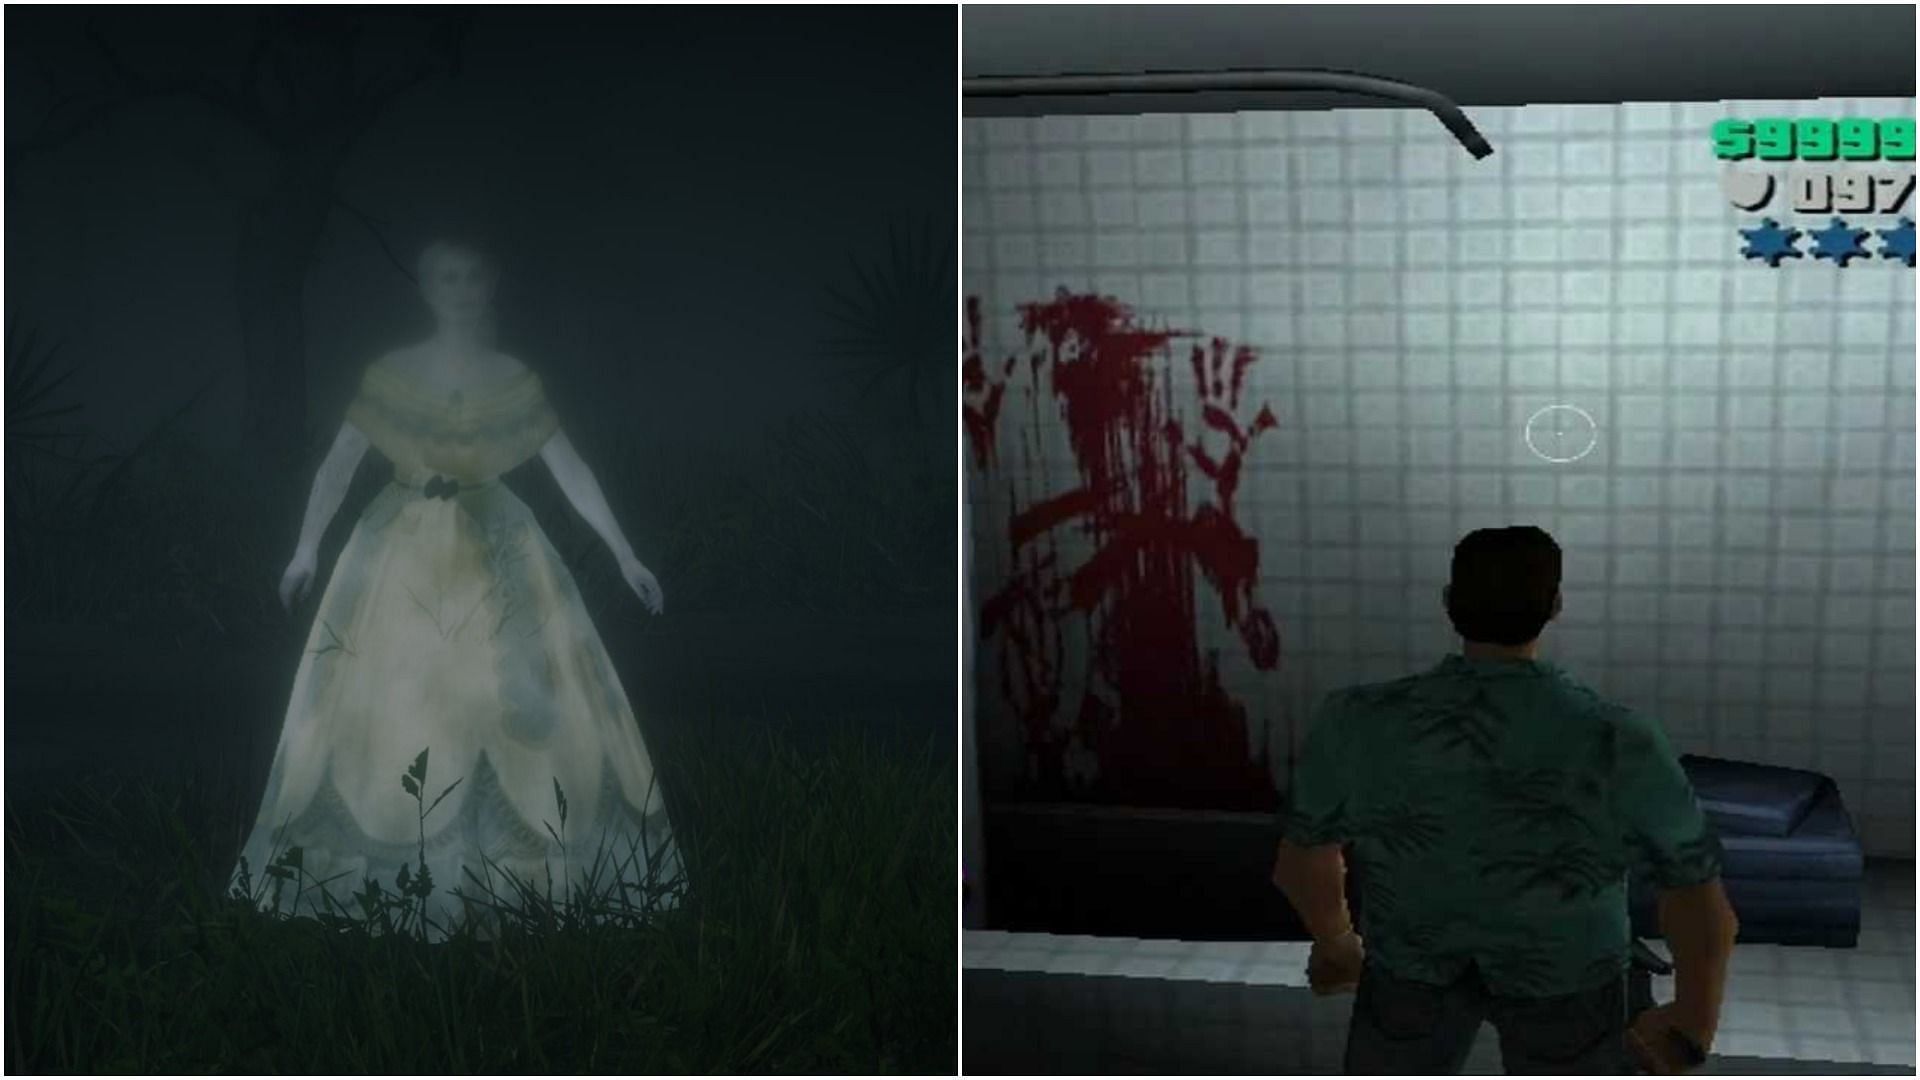 When it comes to Rockstar Games and Easter Eggs, unexpected ghostly apparitions have become a reoccurring trend (Image via - Twitter/ @RedDead2Photo and YouTube/ Gamesmodworld)